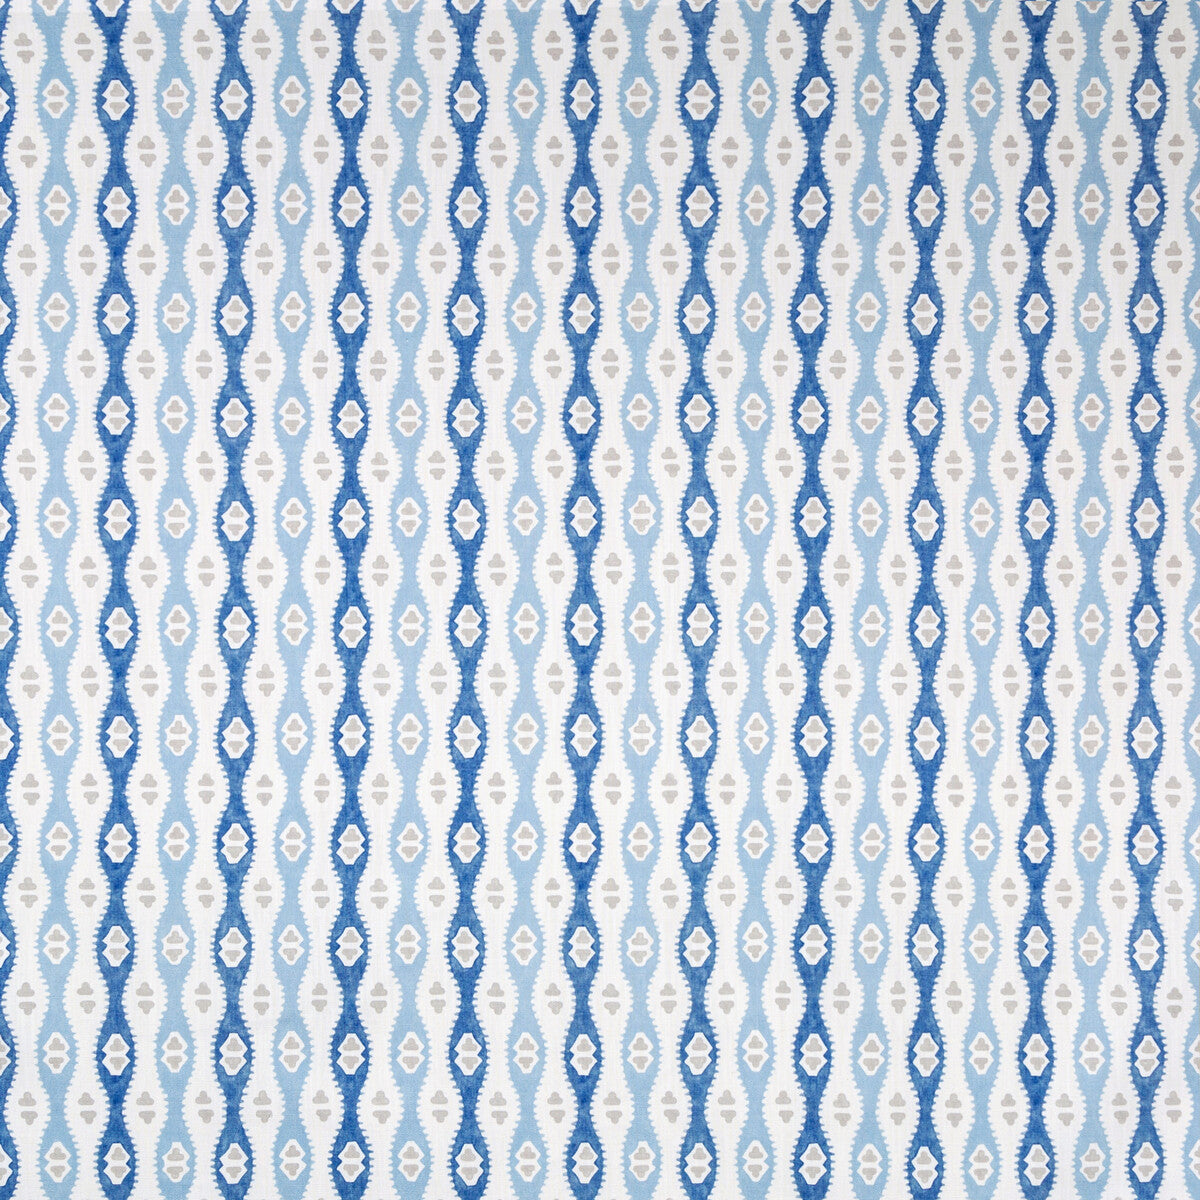 Elba Print fabric in capri color - pattern 2020187.155.0 - by Lee Jofa in the Avondale collection